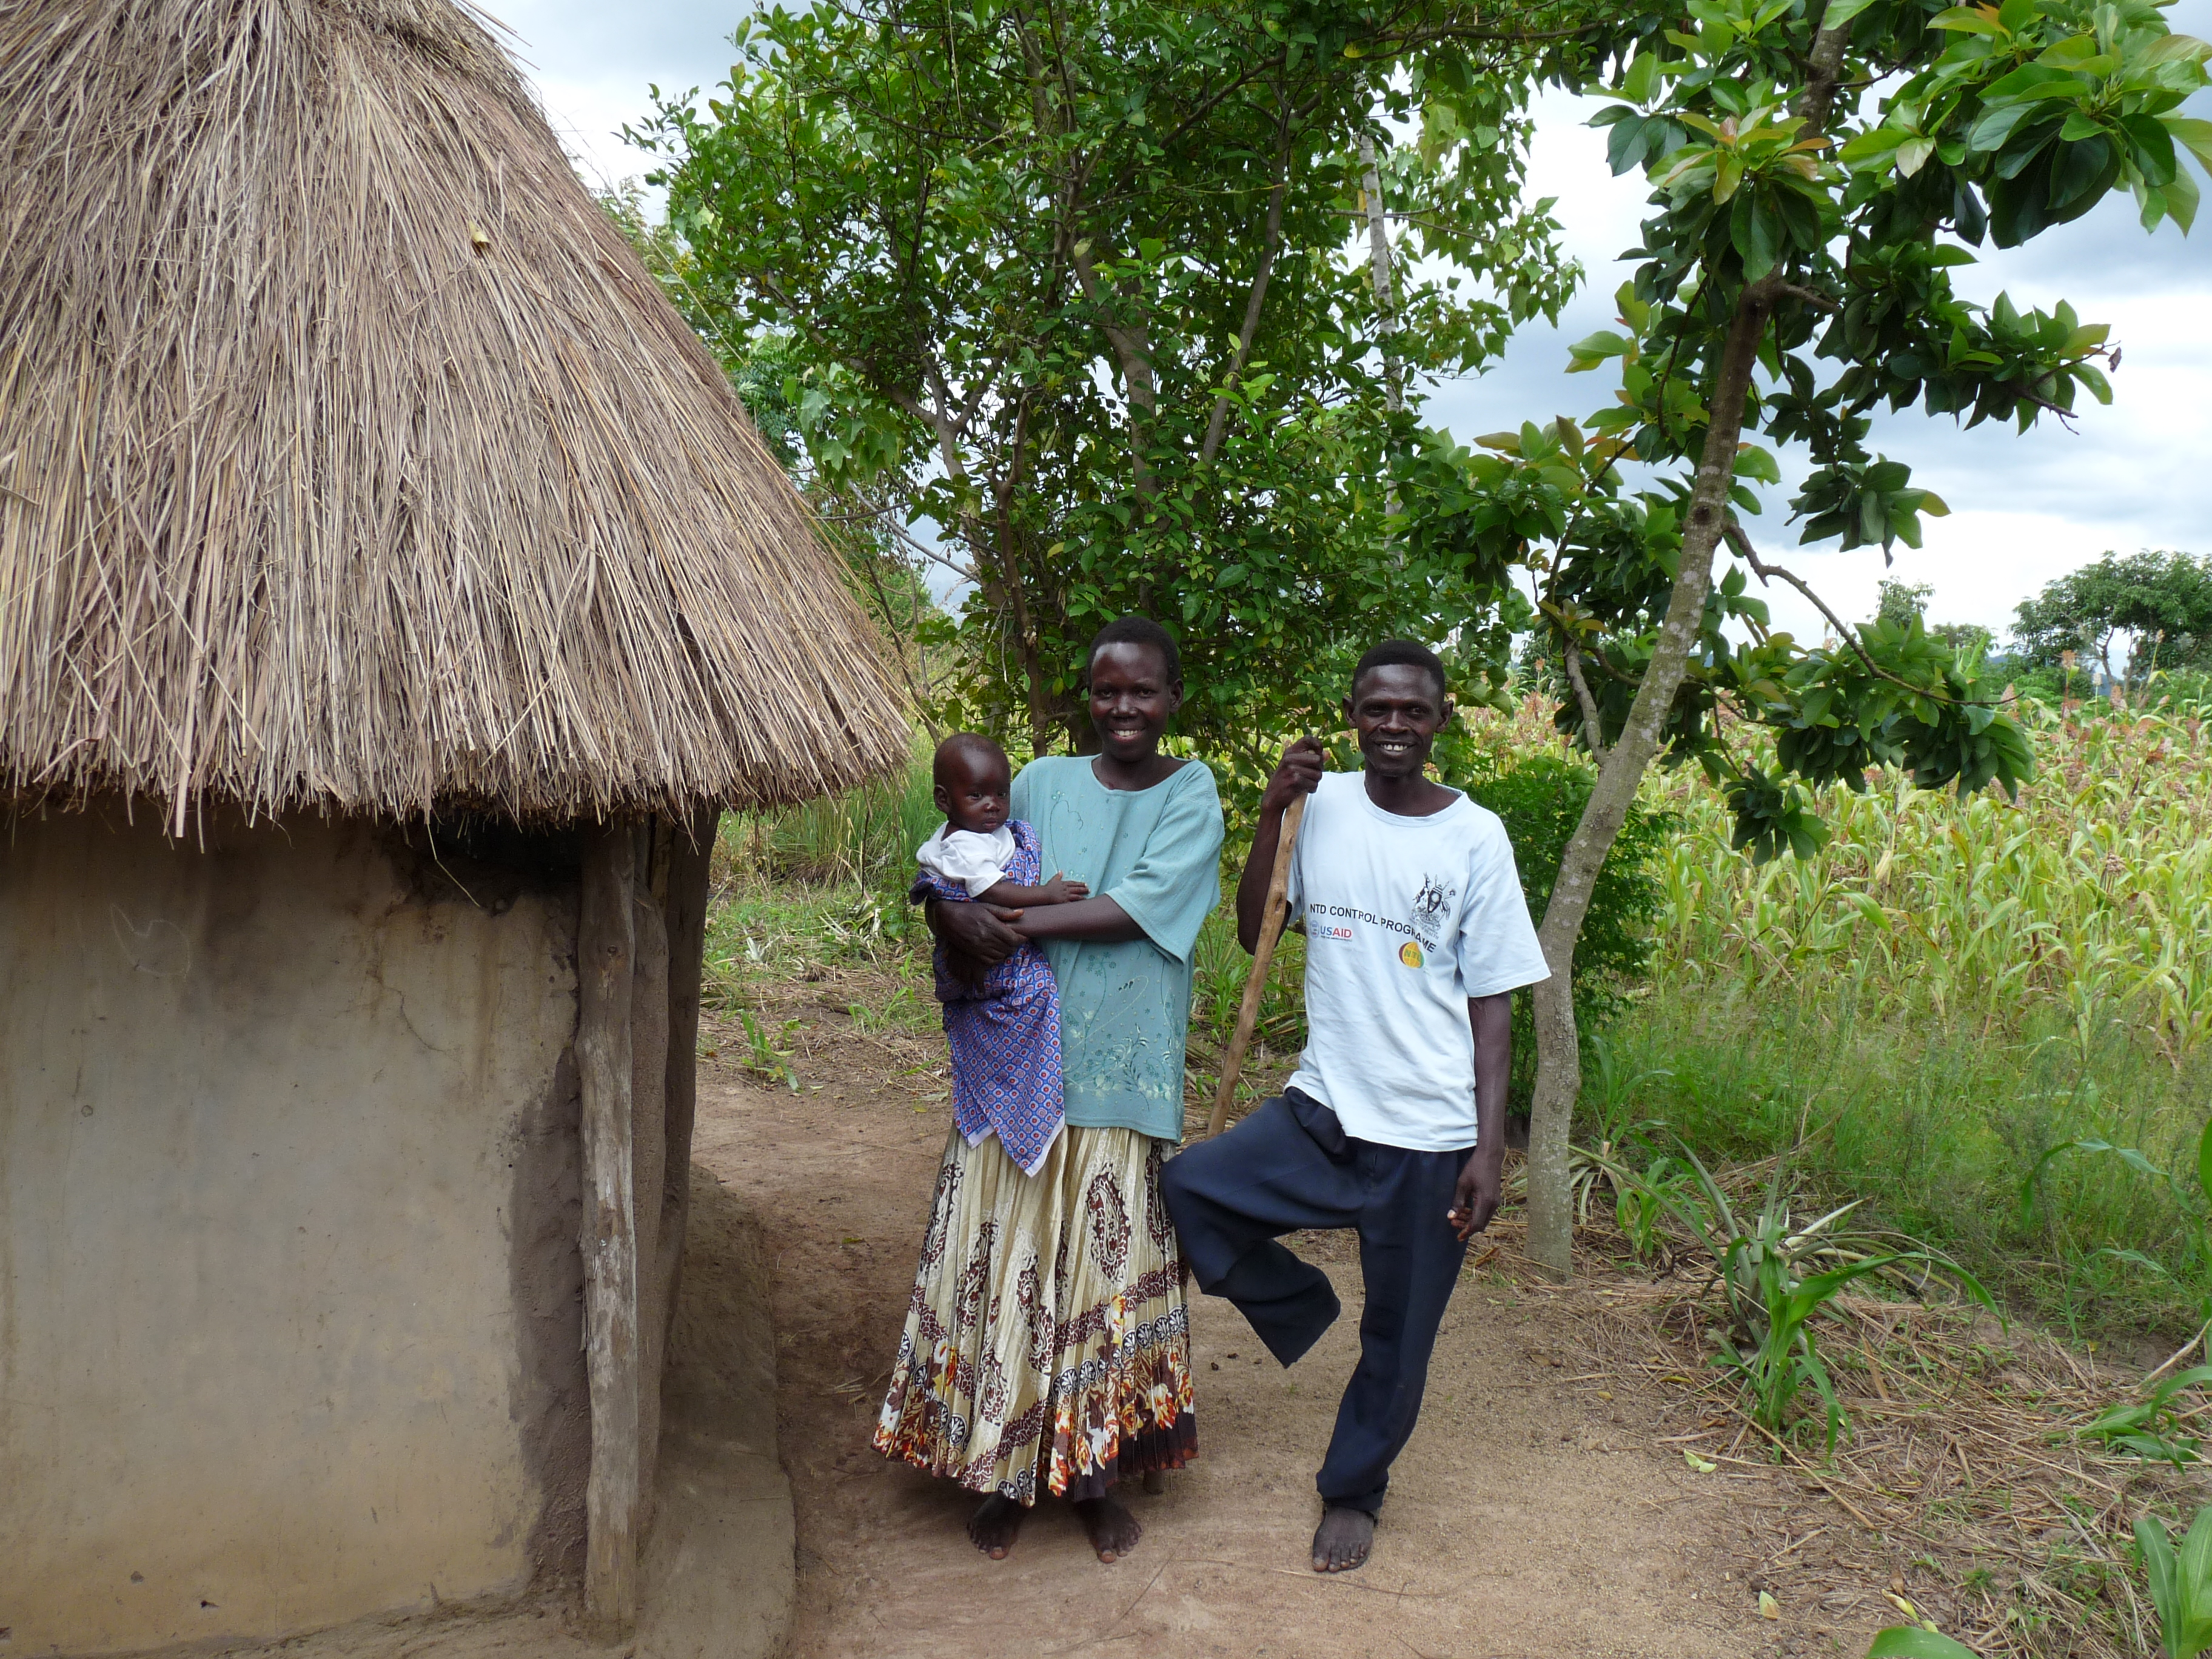 Samuel and his family proudly showing their latrine